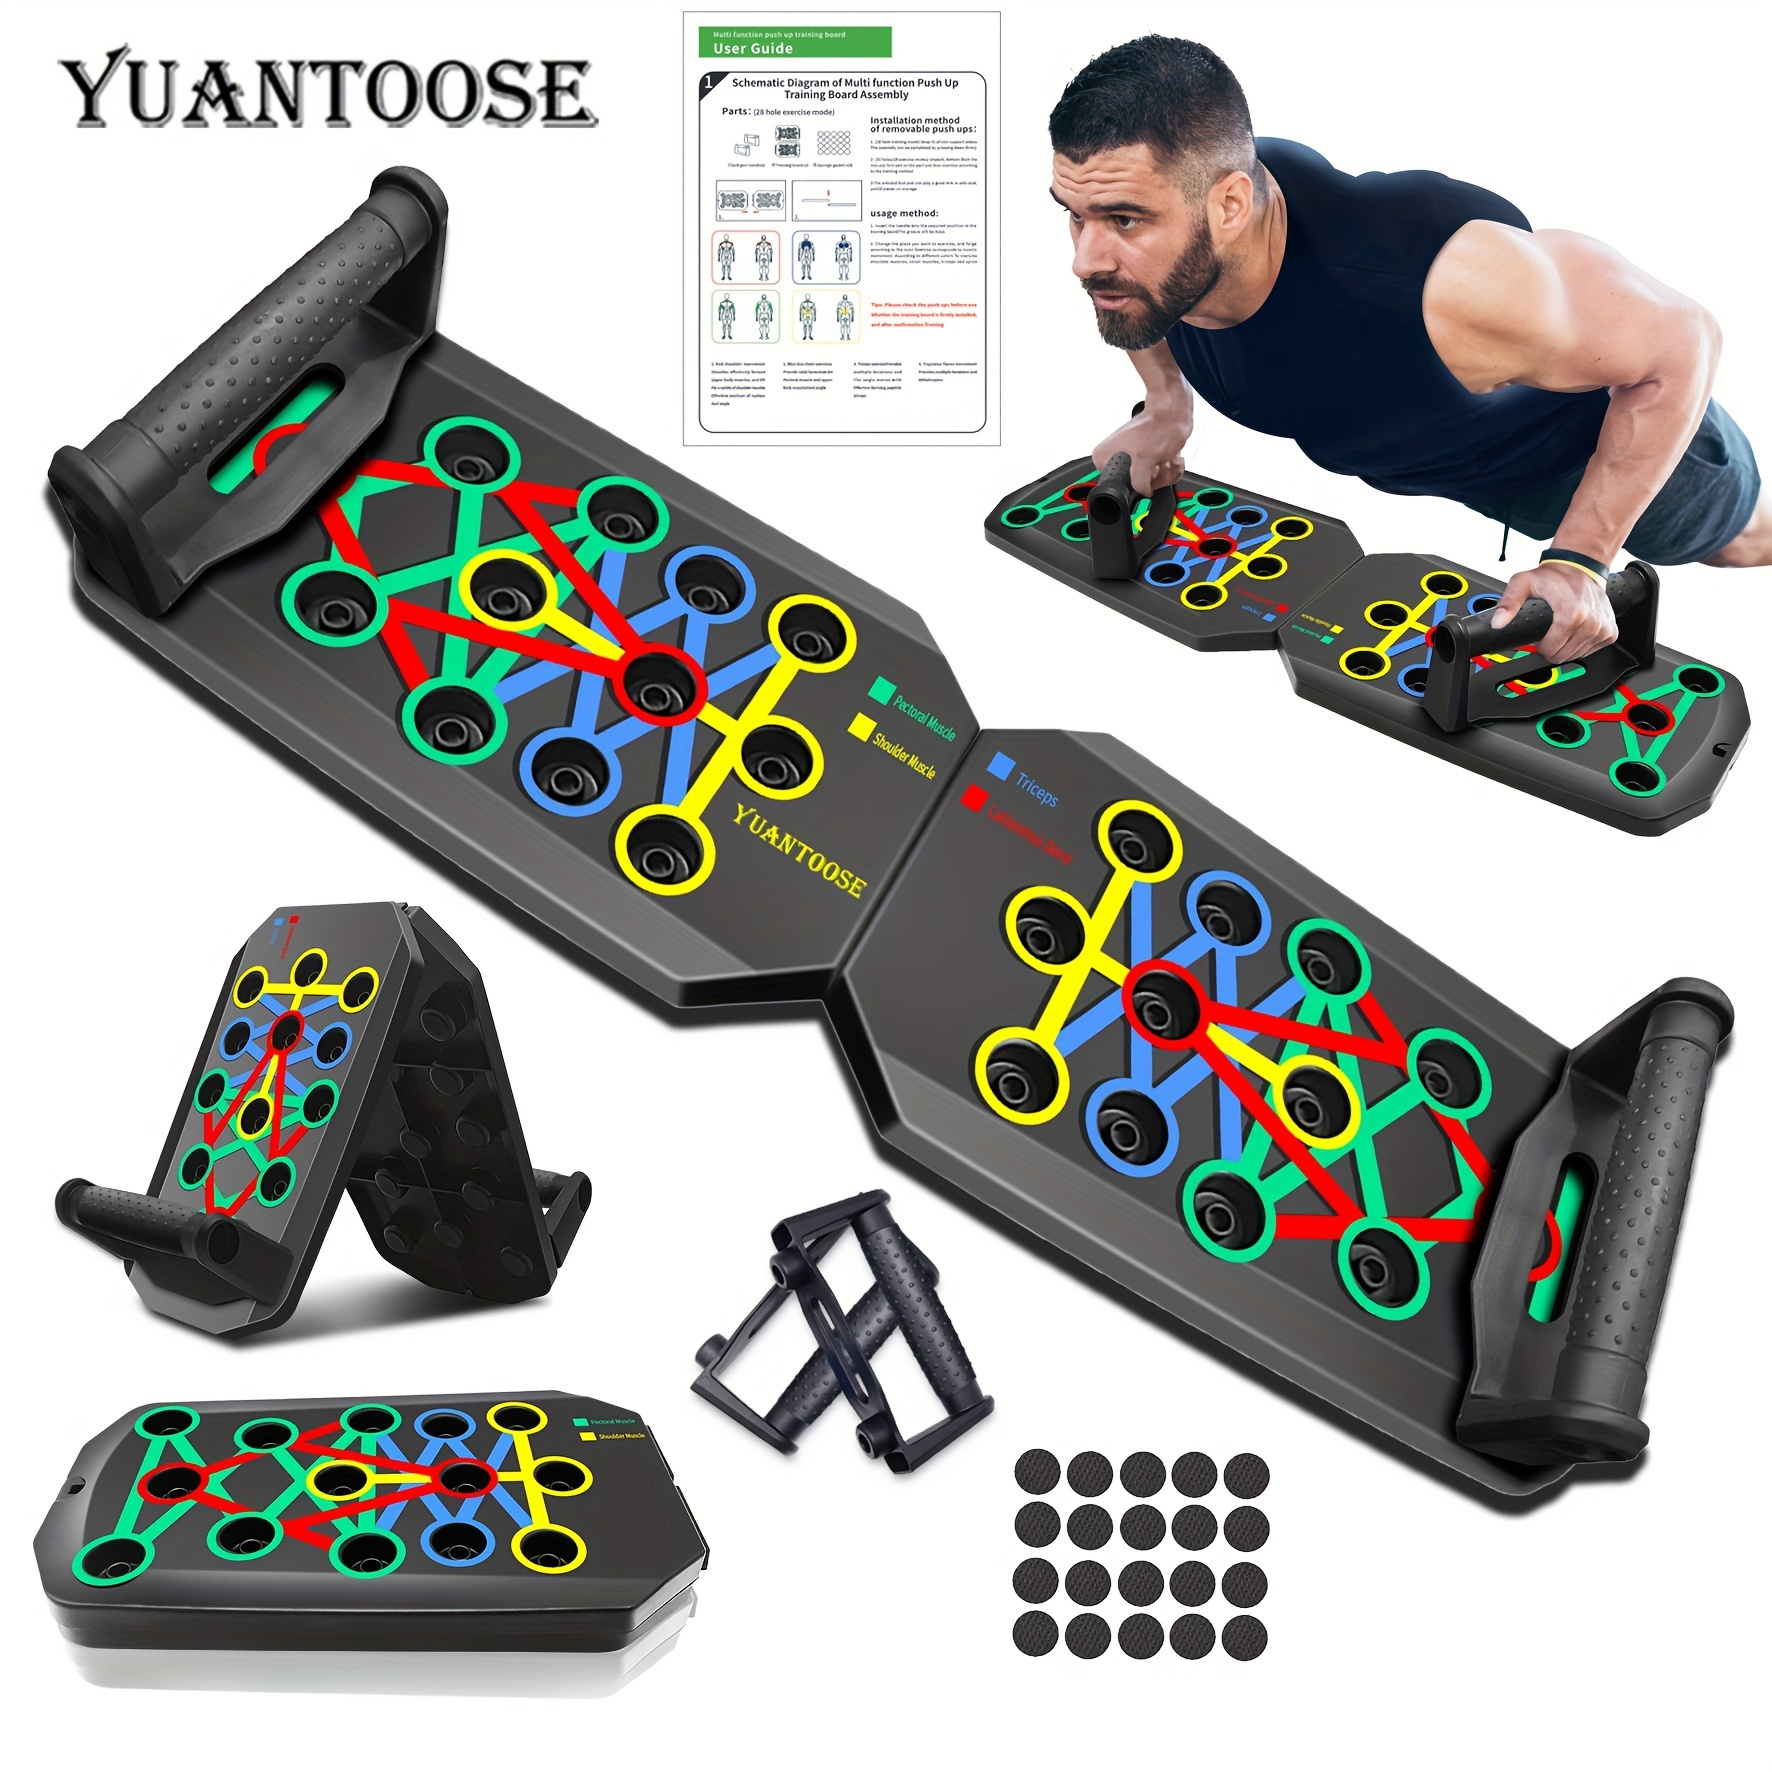 Home Gym Exercise Equipment with Automatic Count Push Up Board Set